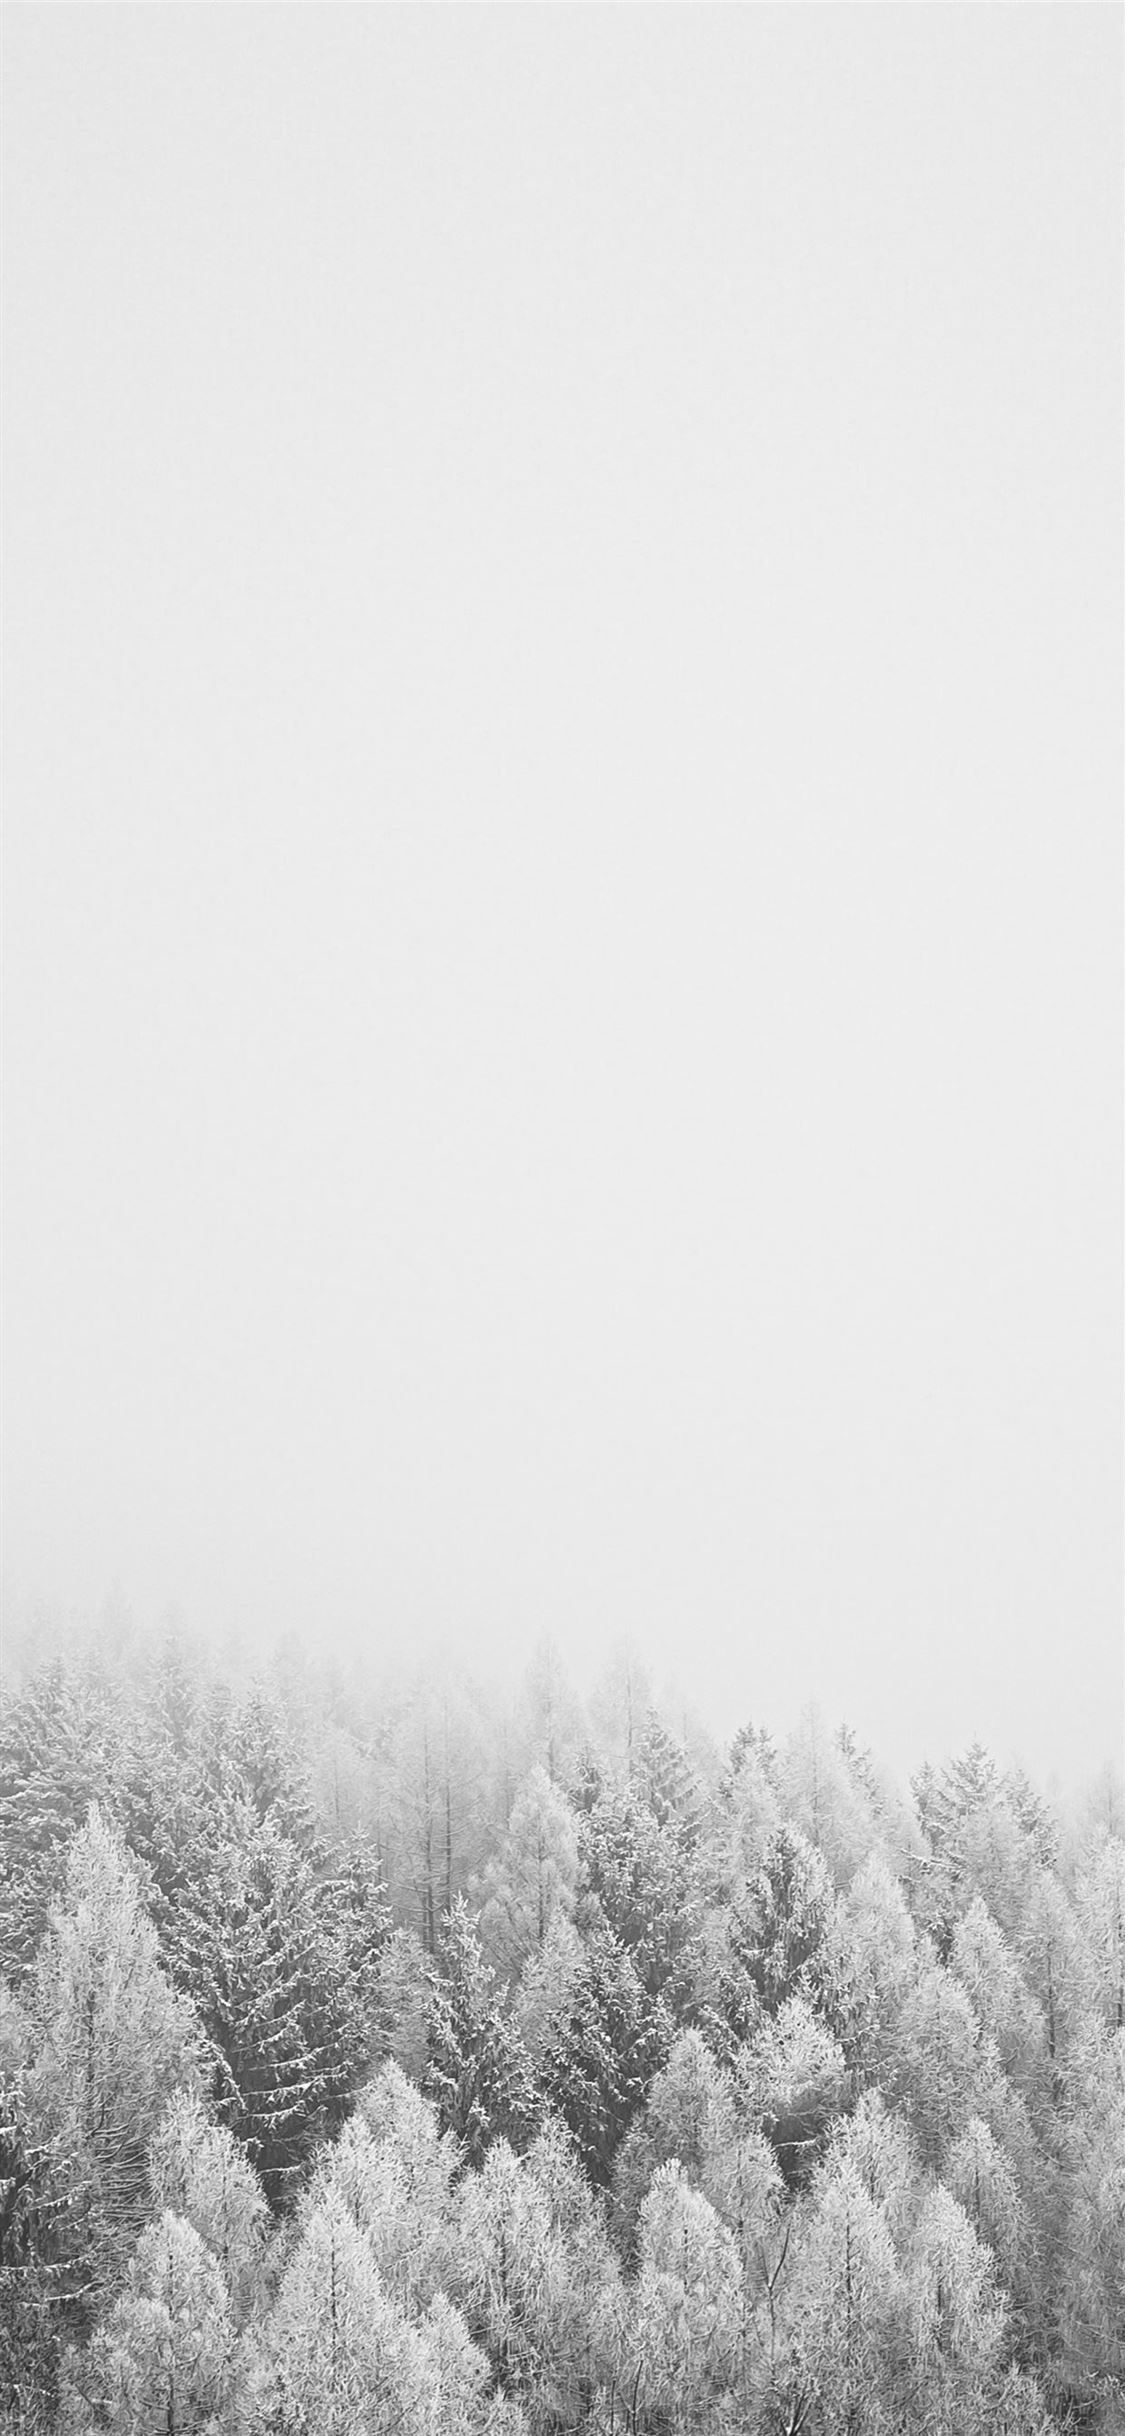 Snow Covered Trees During Daytime #grey #black And White #nature #tree #snow #iPhone11W. Snow Wallpaper Iphone, Winter Wallpaper, Black And White Wallpaper Iphone